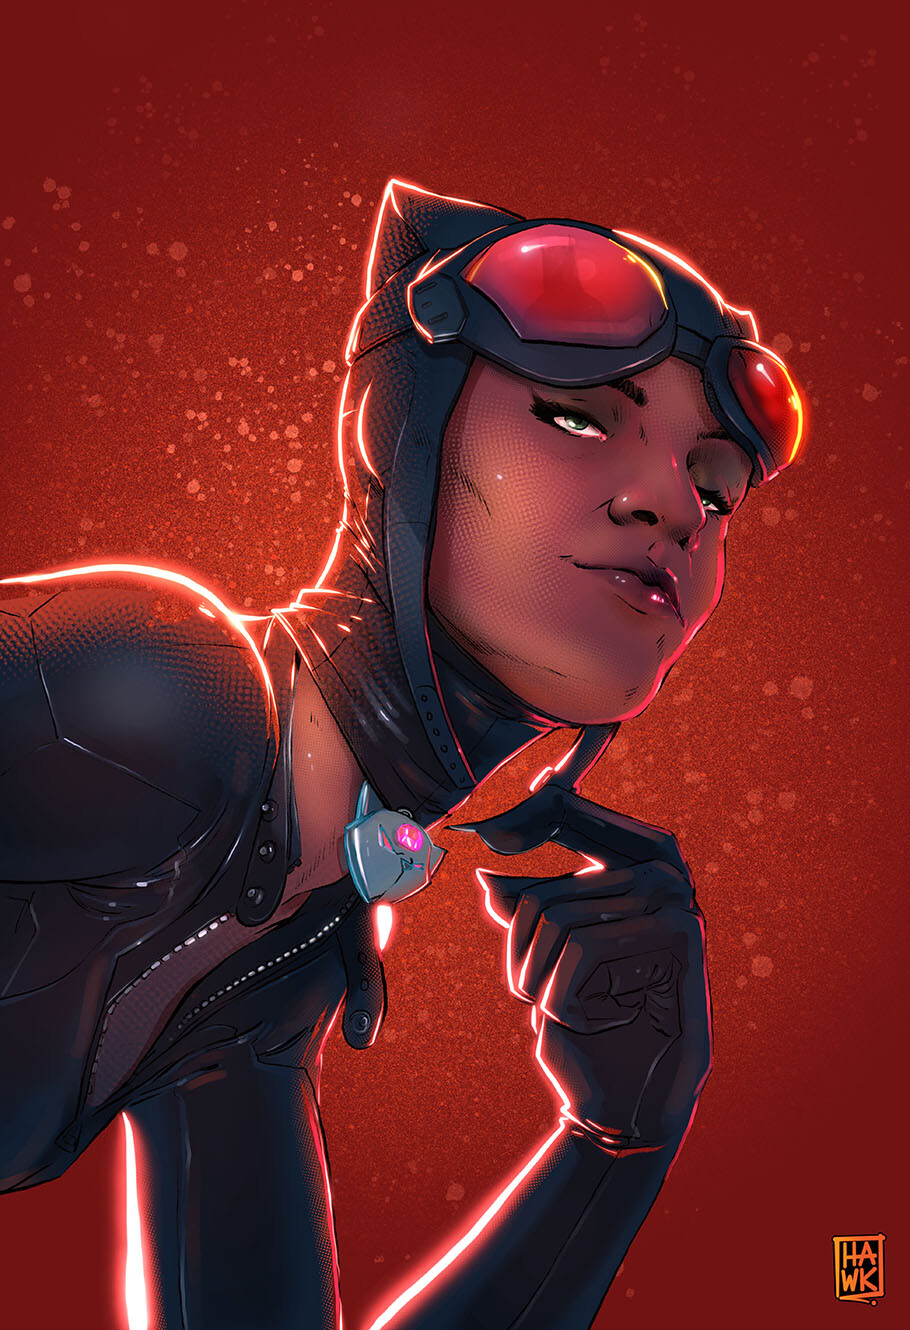 Catwoman fully painted in procreate